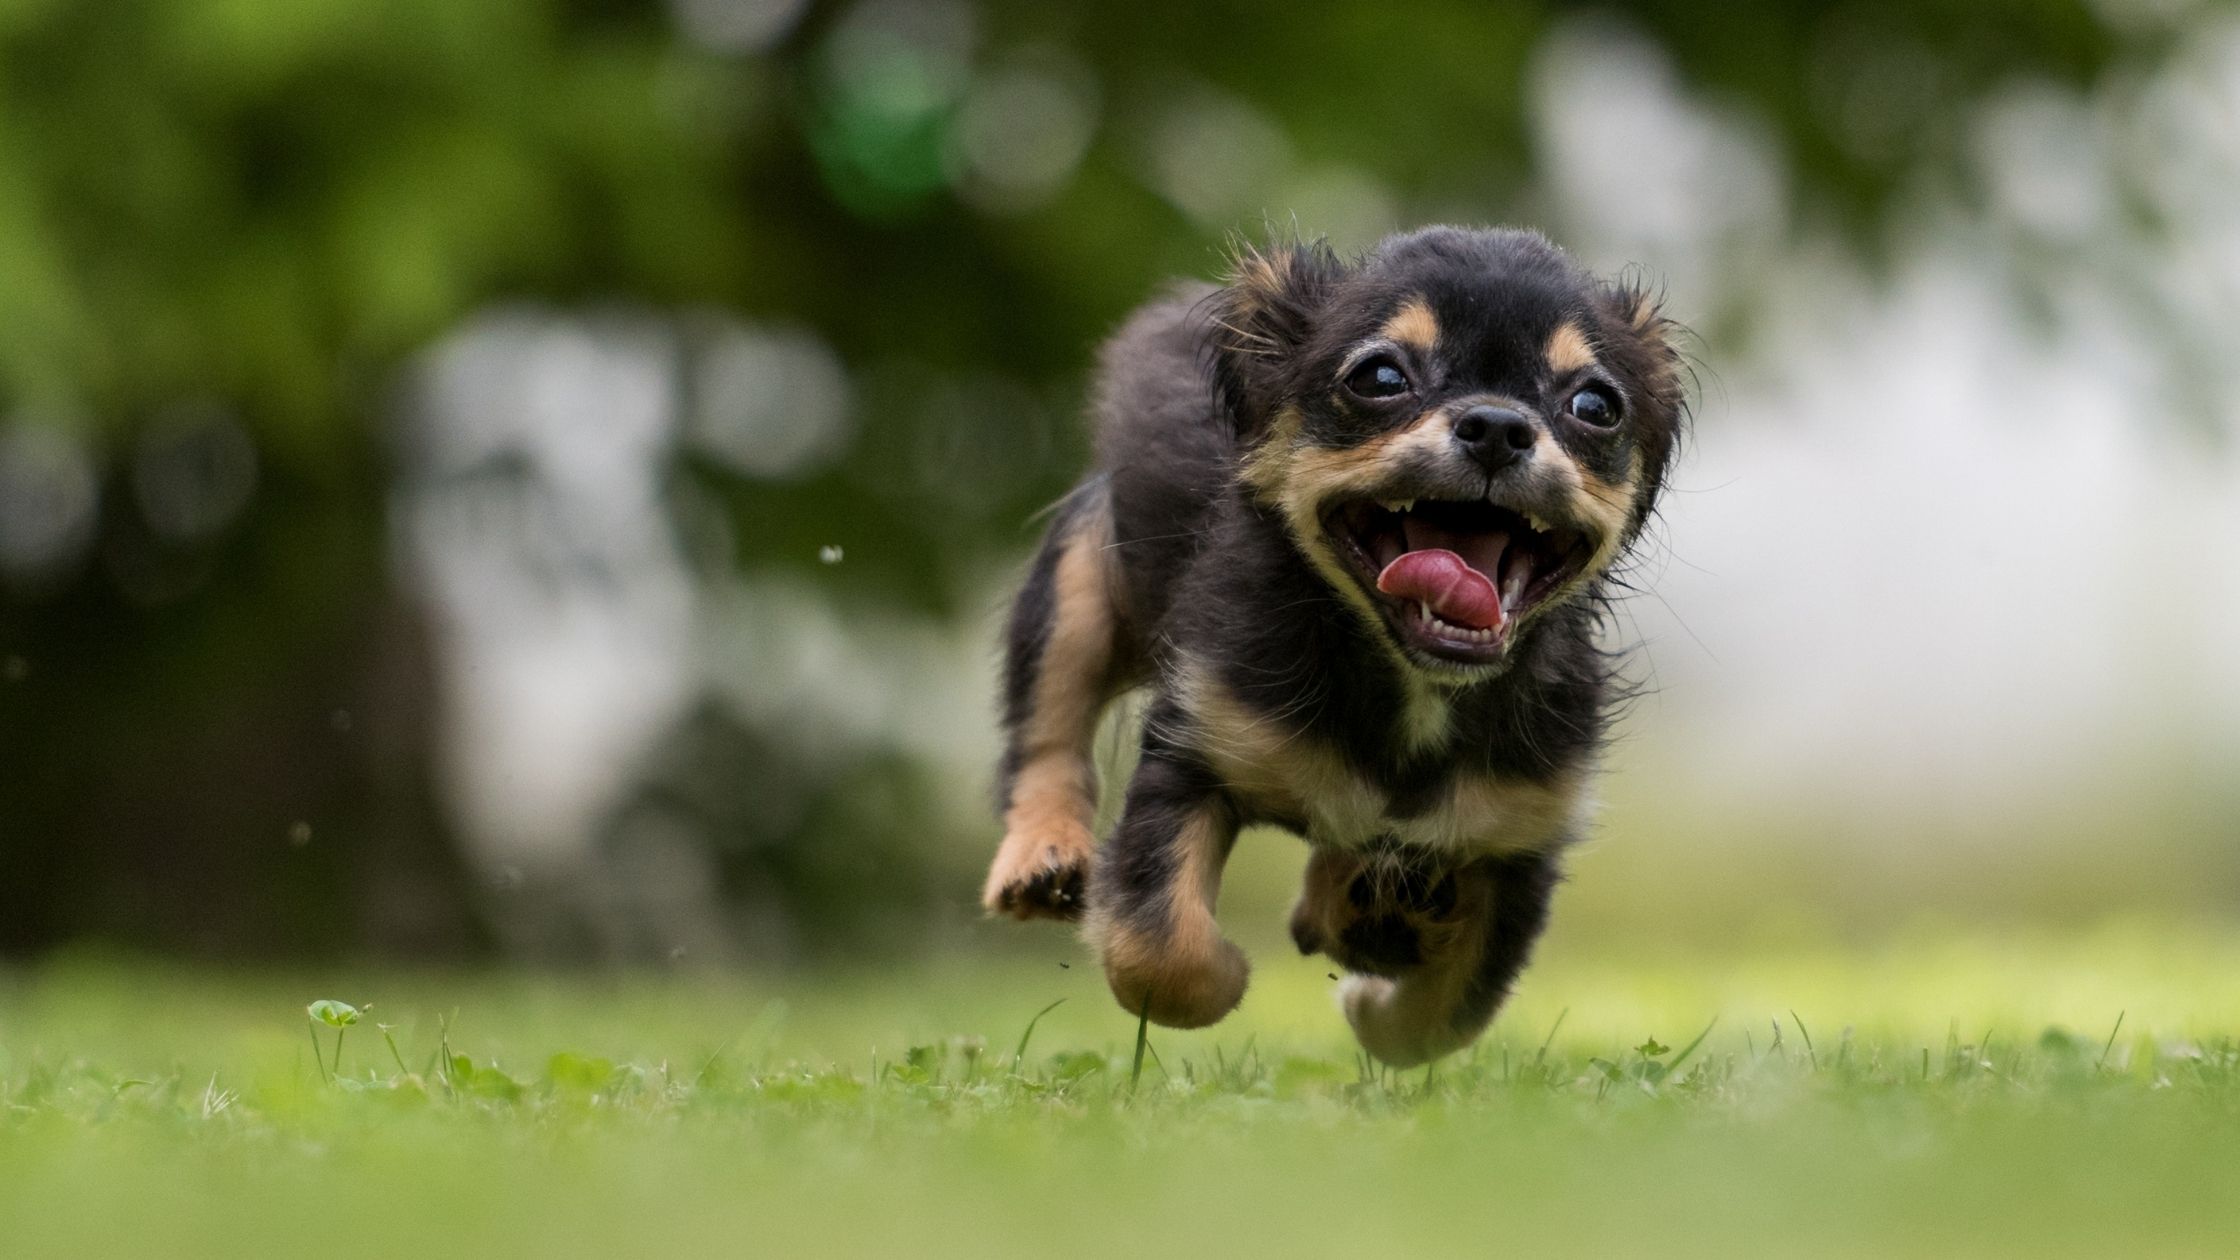 When it comes to puppy training, mastering a recall – coming when called – is essential, as it's a potentially life-saving command.